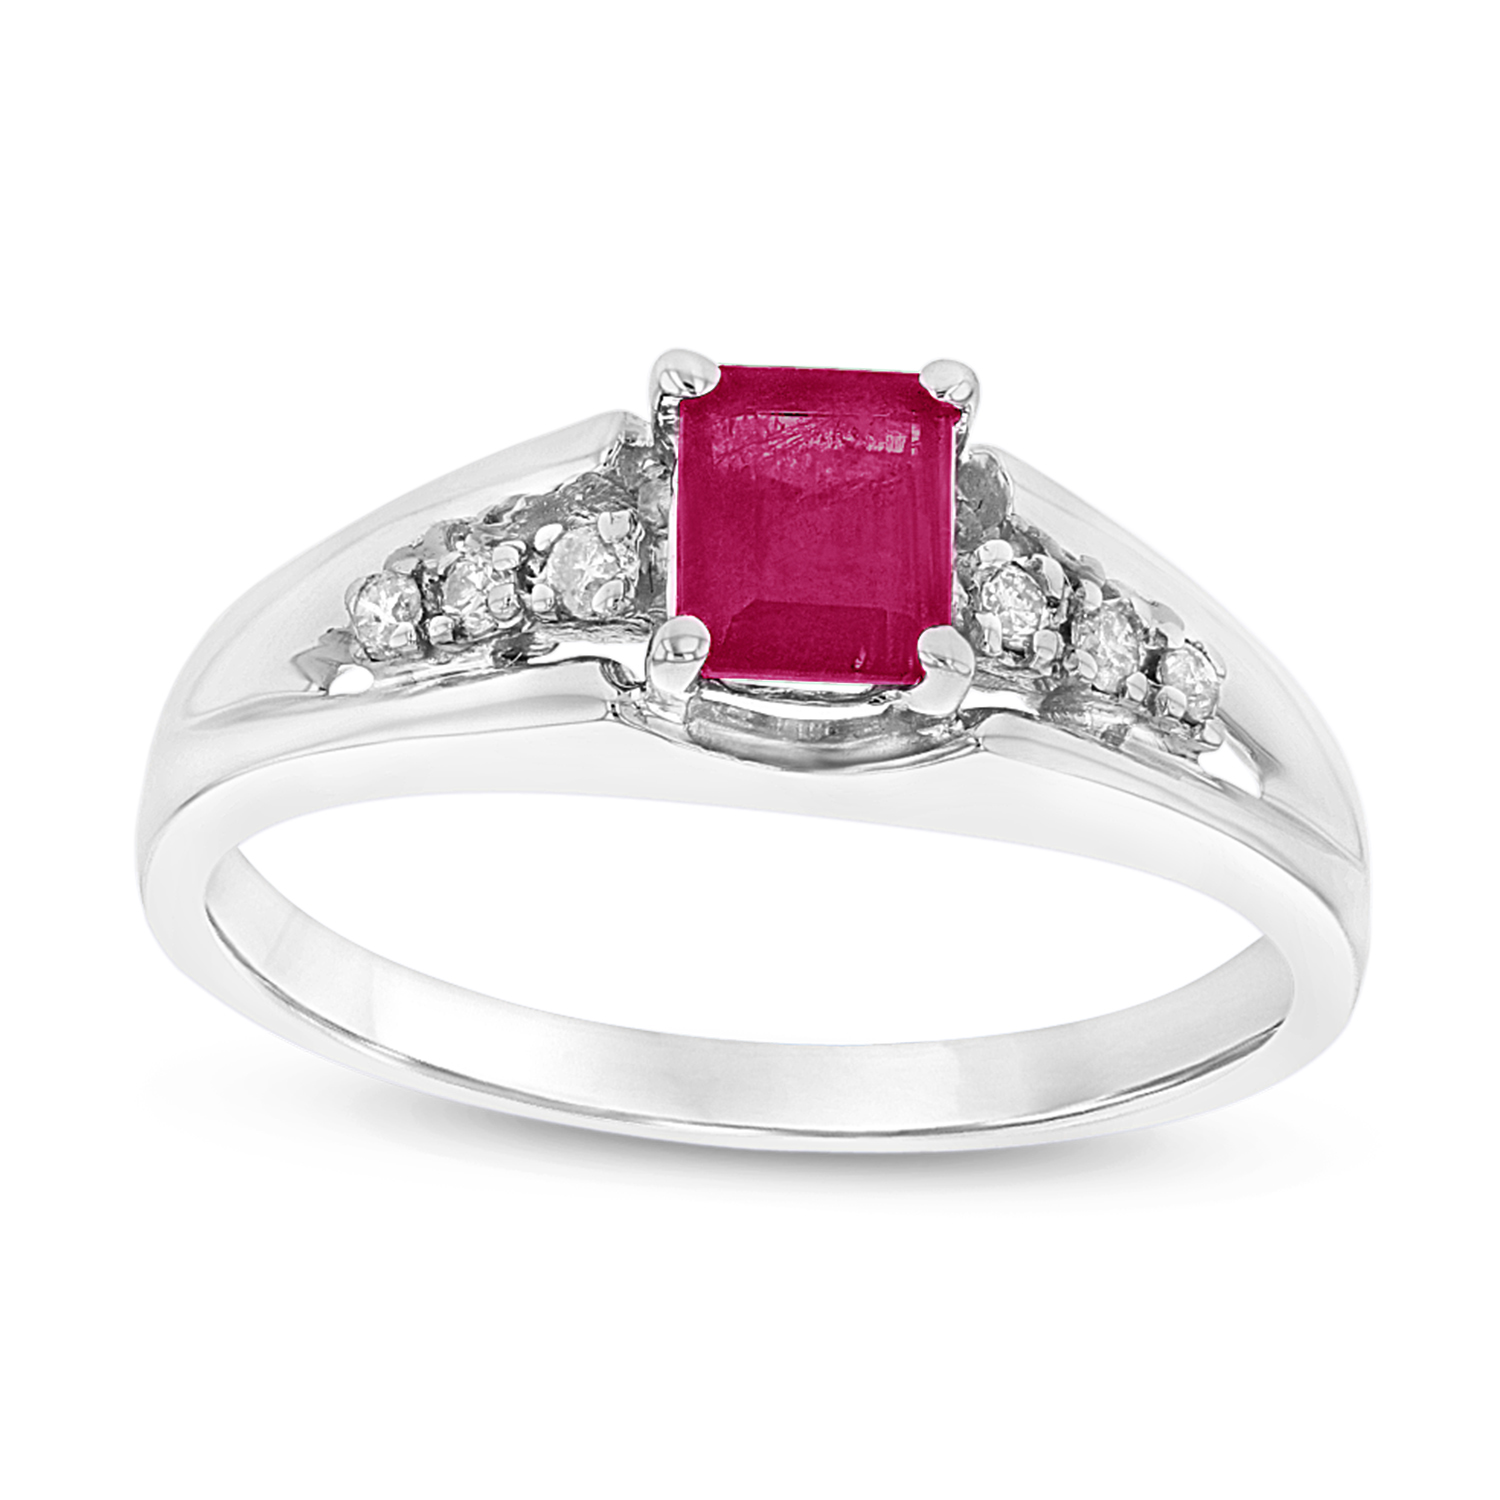 View 0.68cttw Natural Heated Ruby and Diamond Ring set in 14k Gold